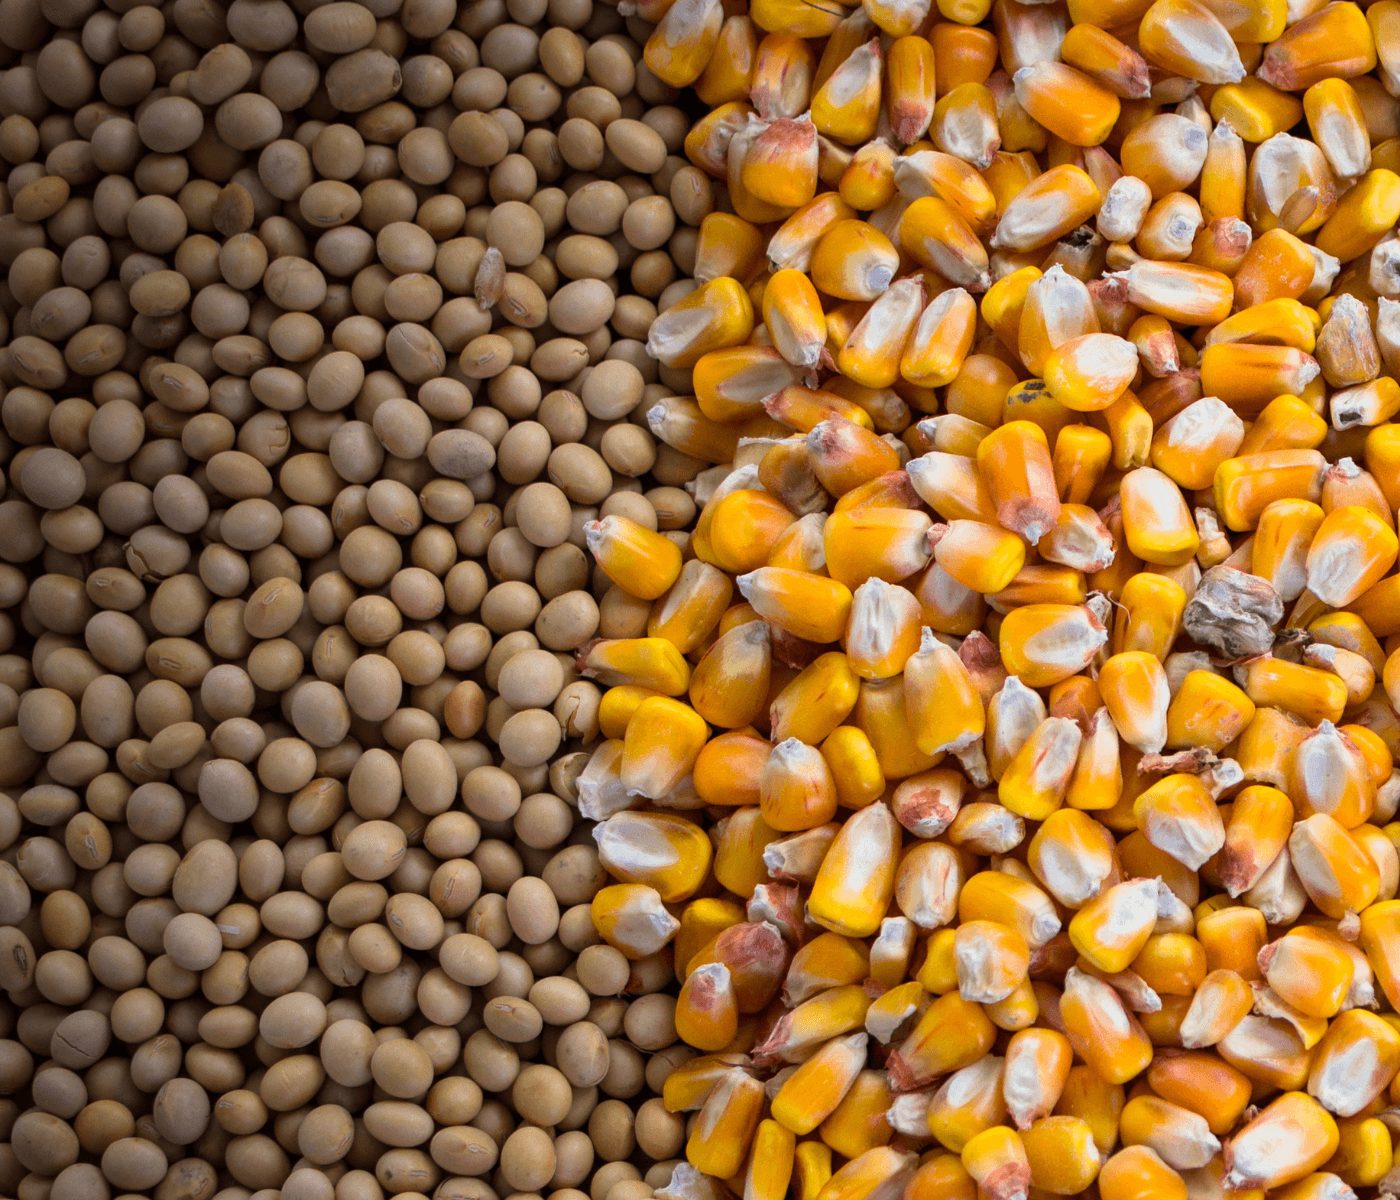 Exogenous enzymes in corn and soybean meal based diets: Is it worth it?